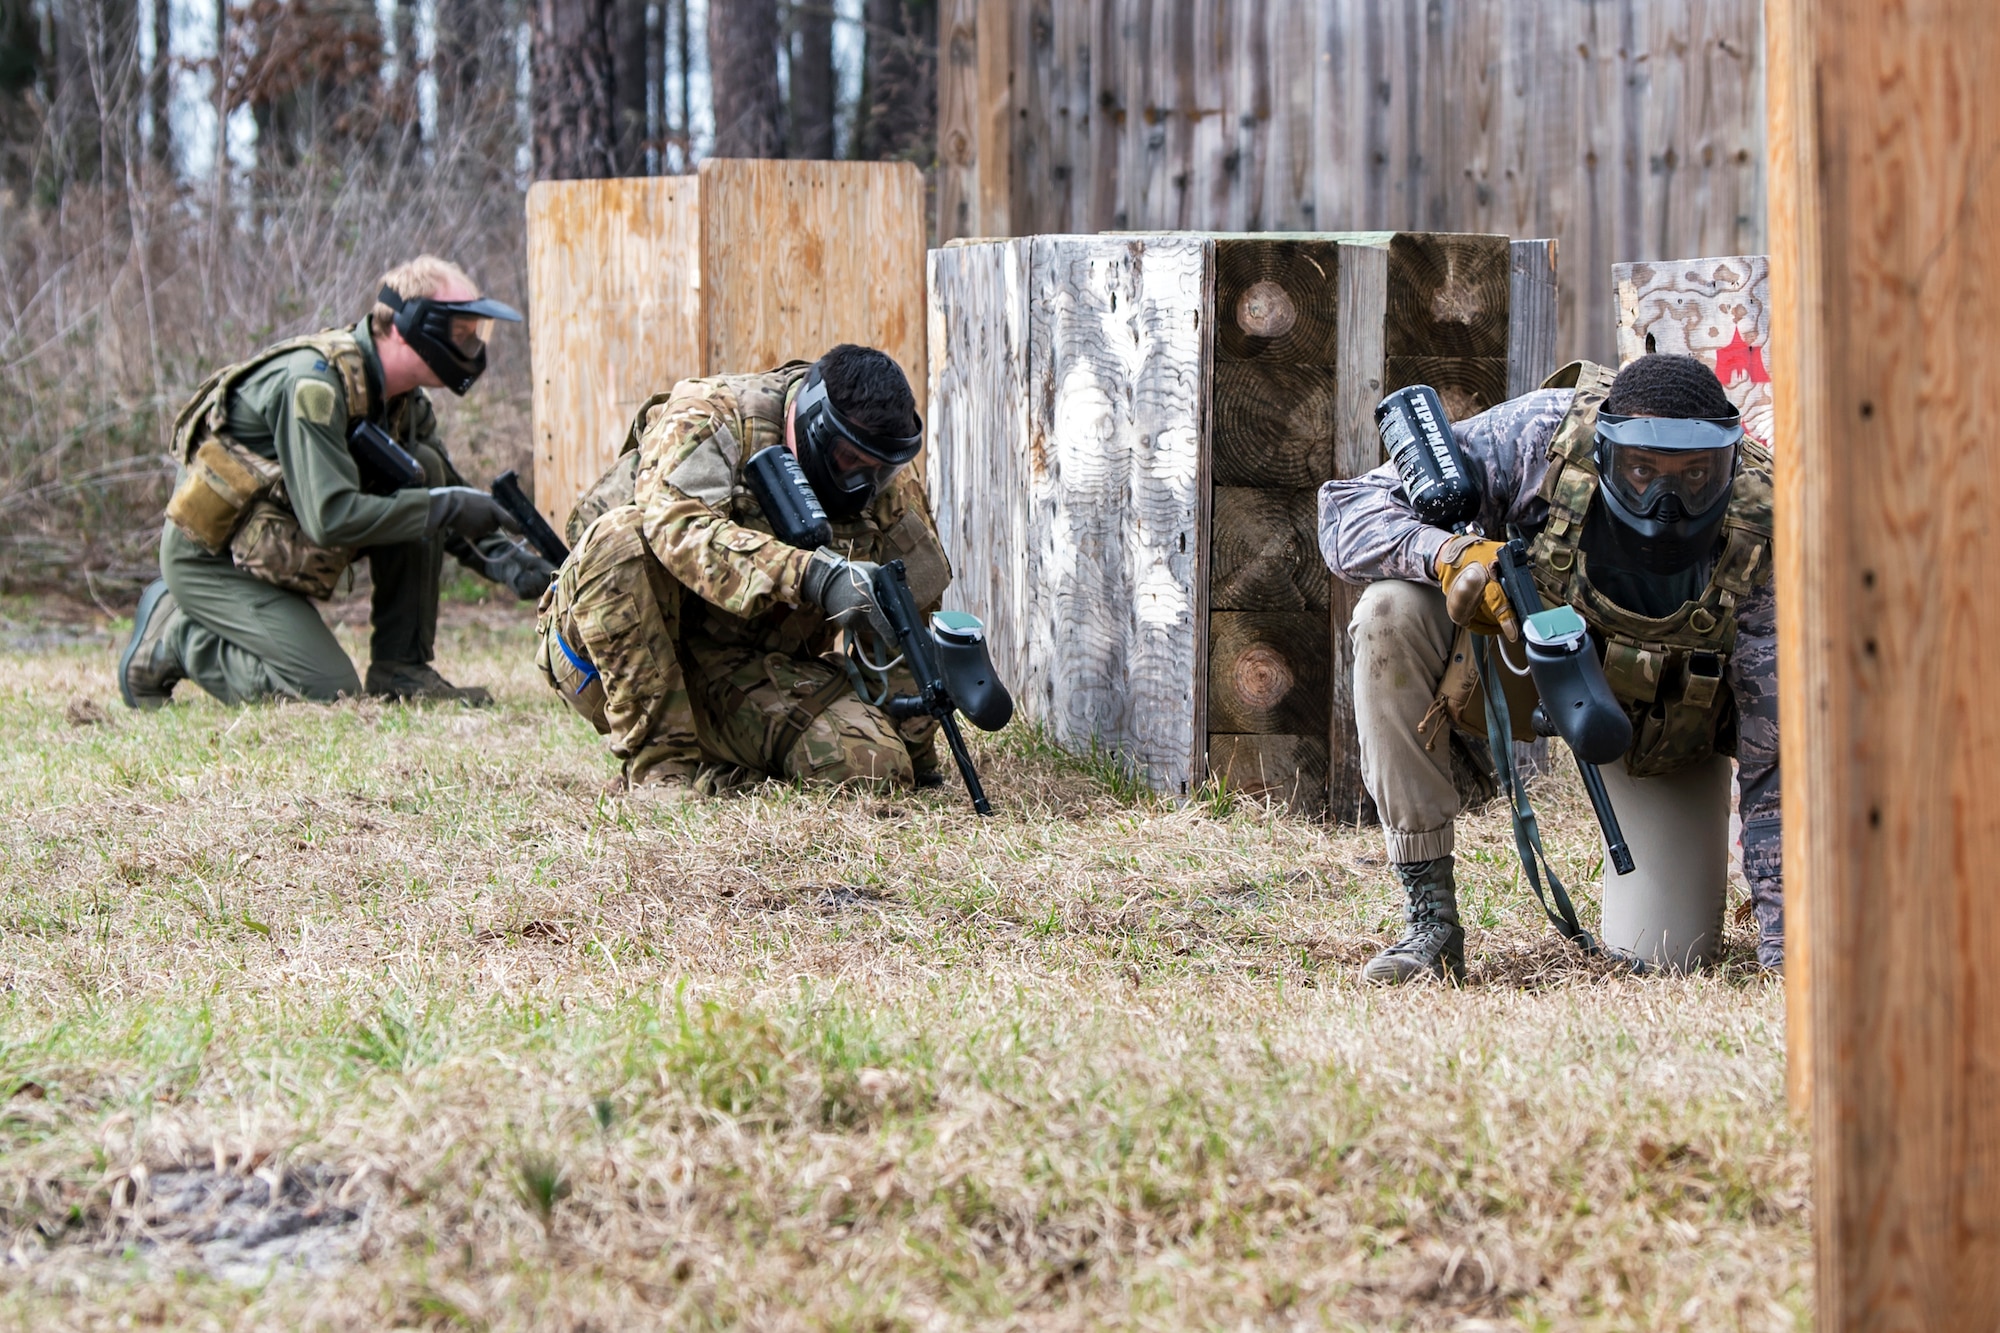 Airmen take cover form enemy fire, Feb. 14, 2018, at Moody Air Force Base, Ga. Airmen participated in a Tactical Combat Casualty Care (TCCC) course to better prepare themselves to combat an enemy attack while still being able to apply medical care under enemy fire.
(U.S. Air Force photo by Airman Eugene Oliver)